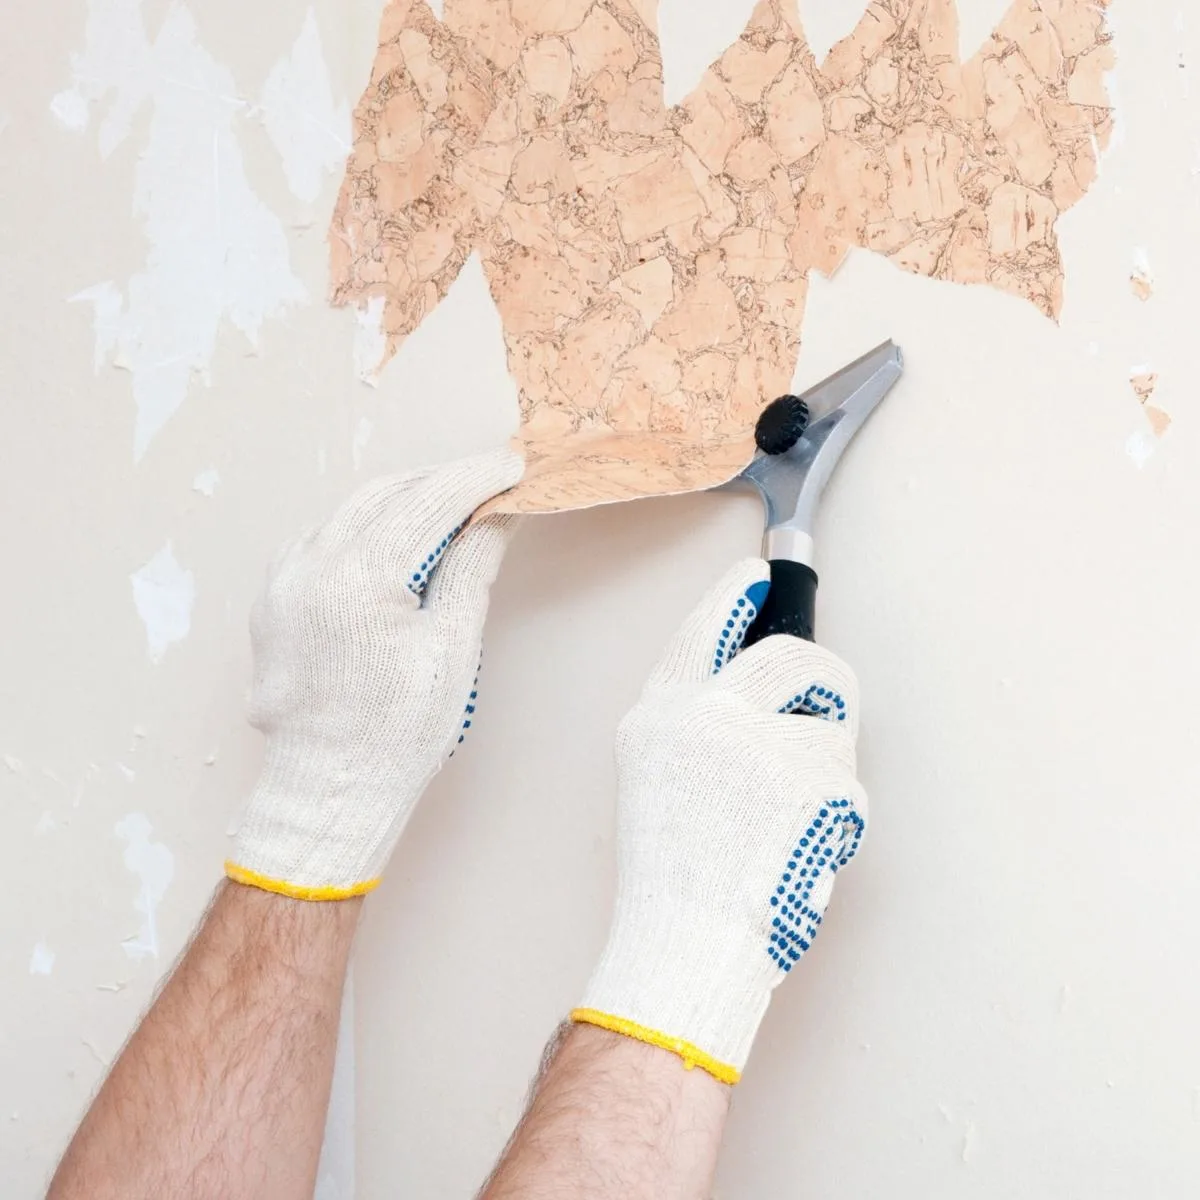 How to Remove Wallpaper - 3 Different Methods - The Handyman's Daughter